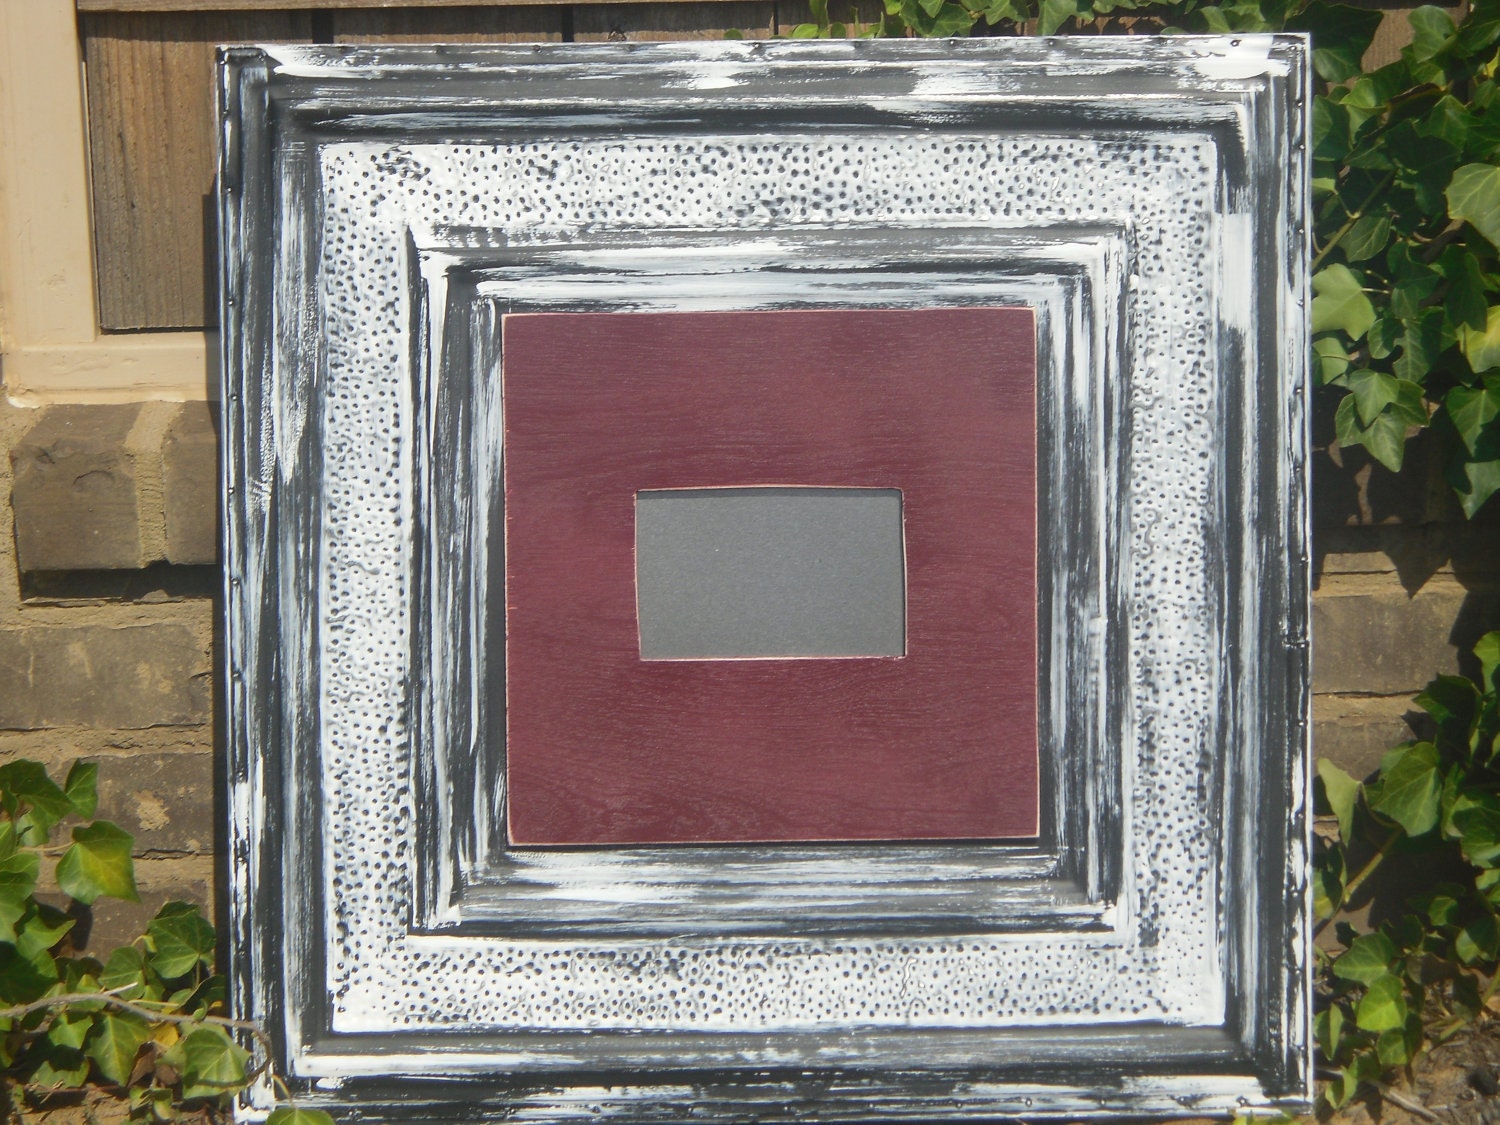 24 x 24 Tin Frame w/ 4x6 Opening for a Picture